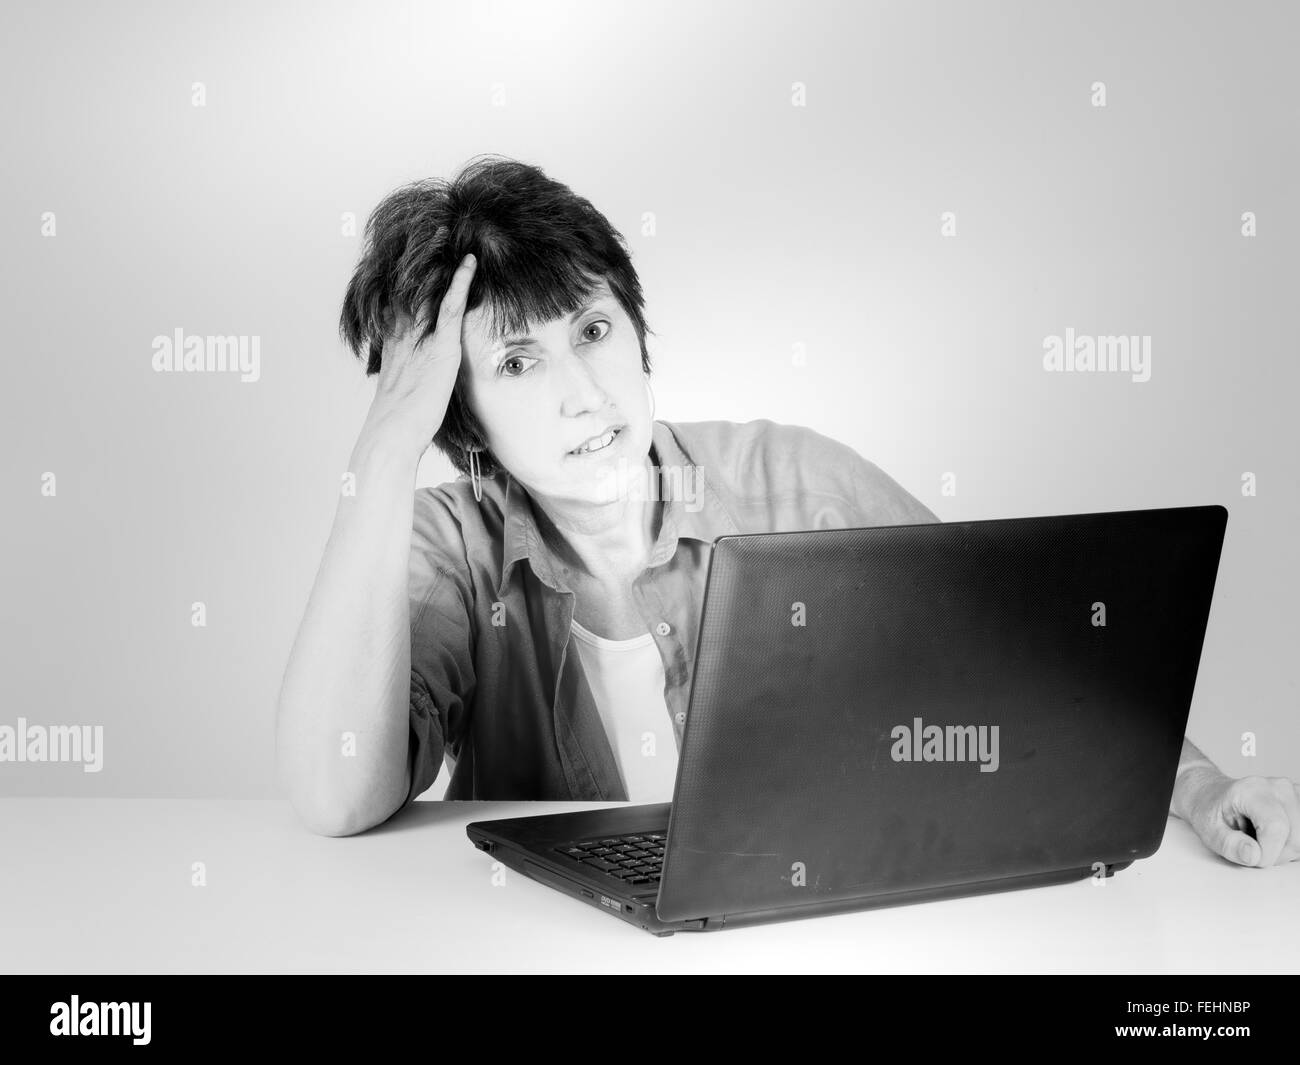 Middle aged woman with laptop, tired. Retro filtered monochrome image. Stock Photo